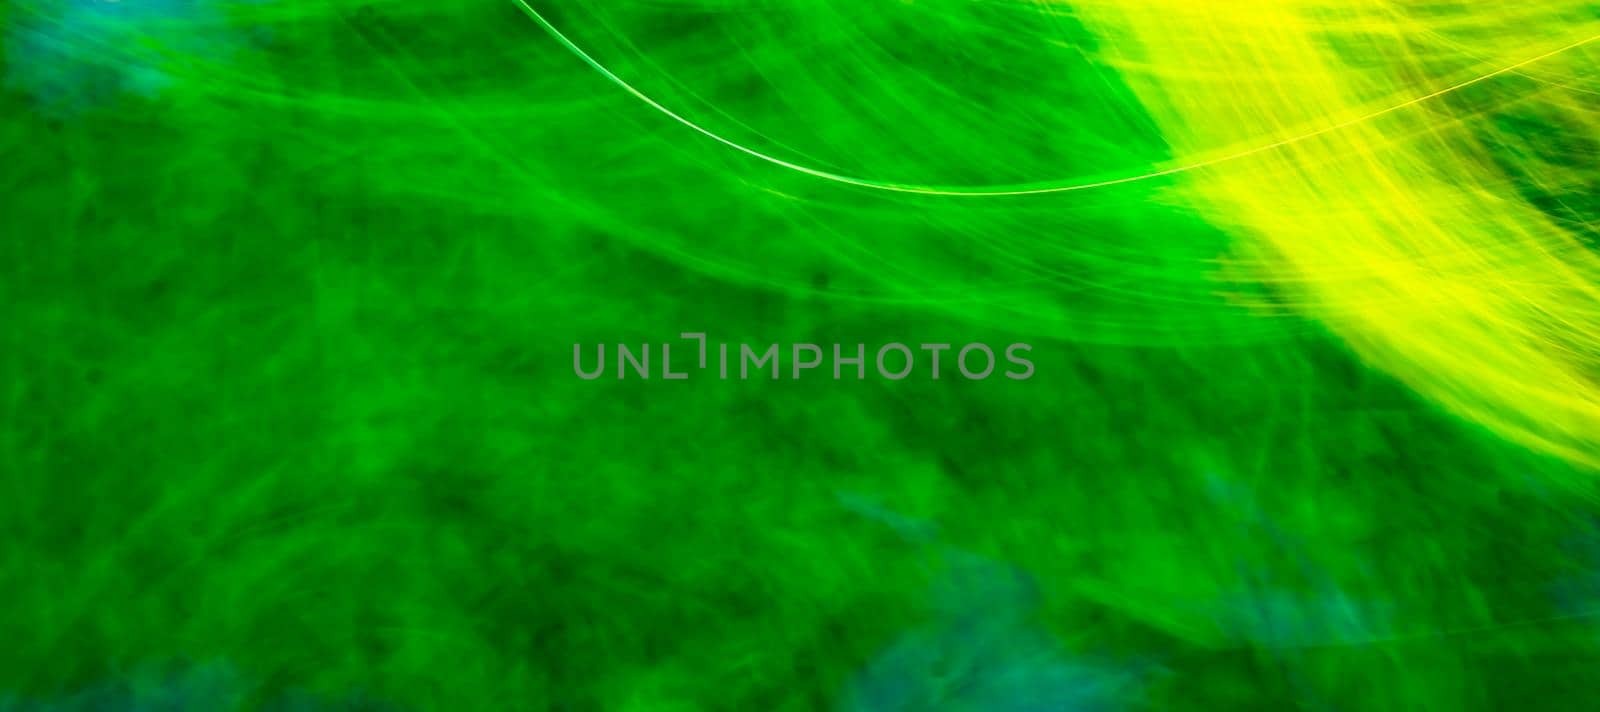 Abstract, bright green acidic background with a yellow tint, glowing waves and lines. Backdrop